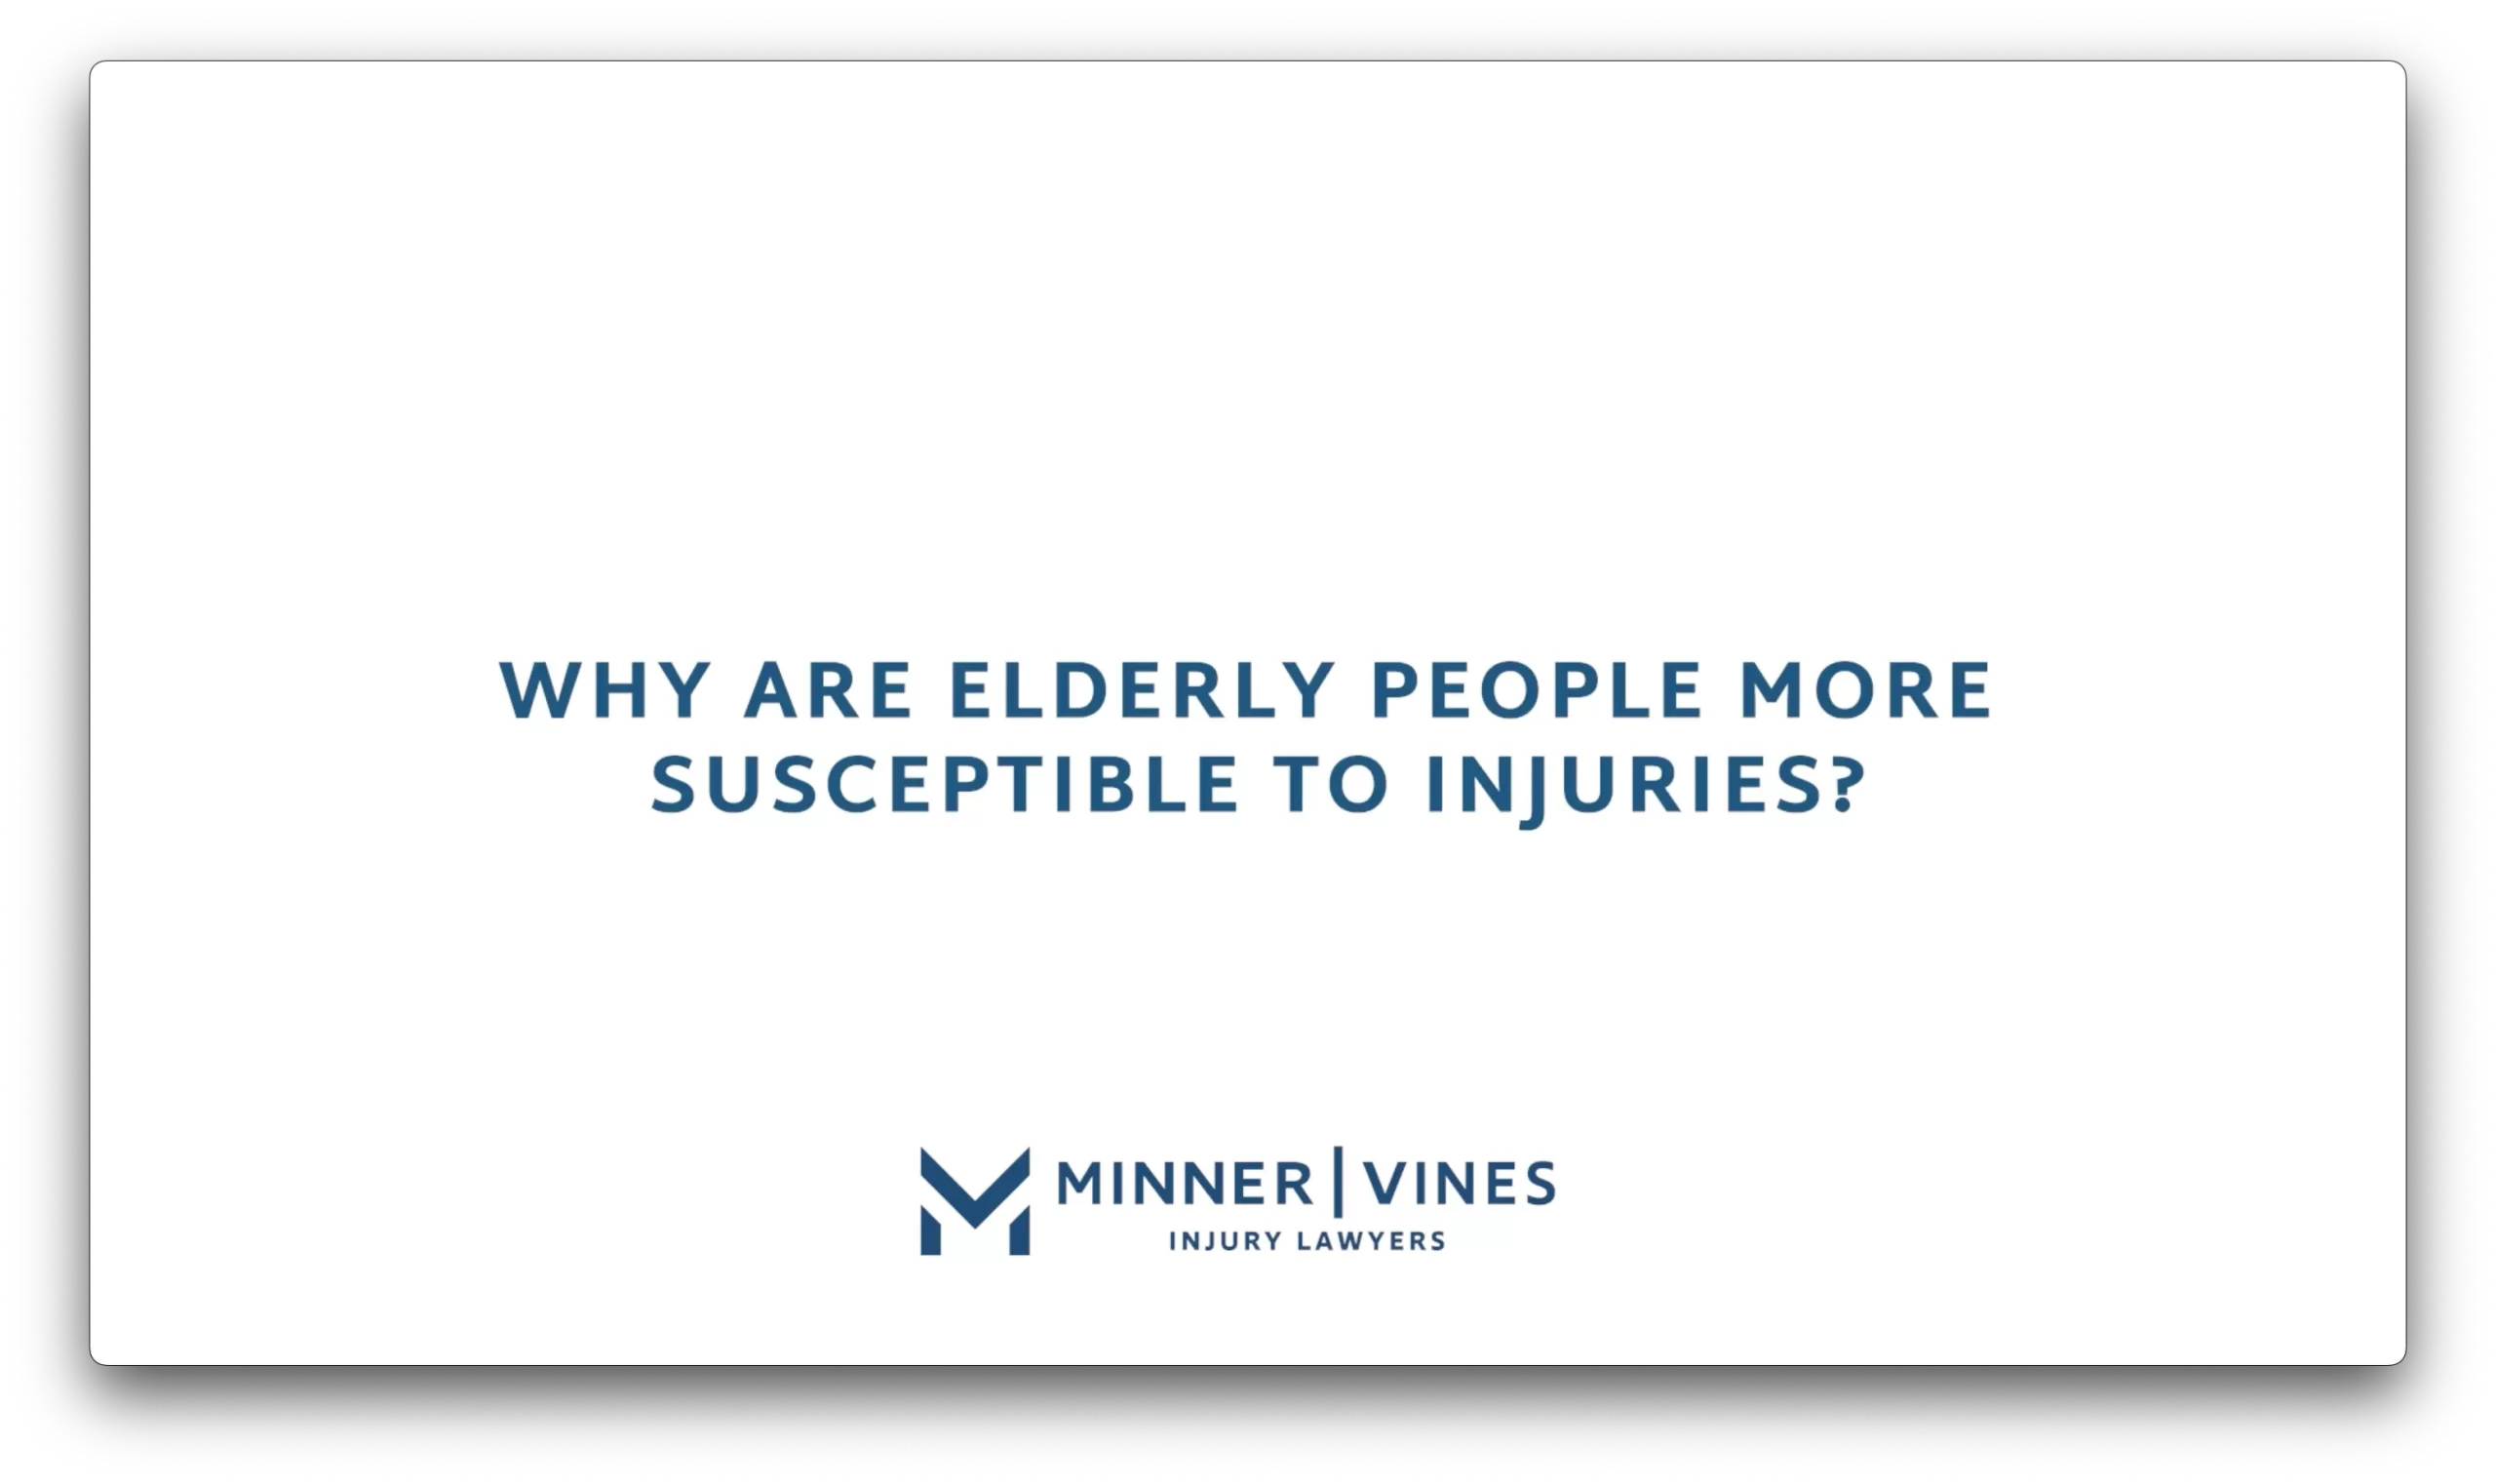 Why are elderly people more susceptible to injuries?